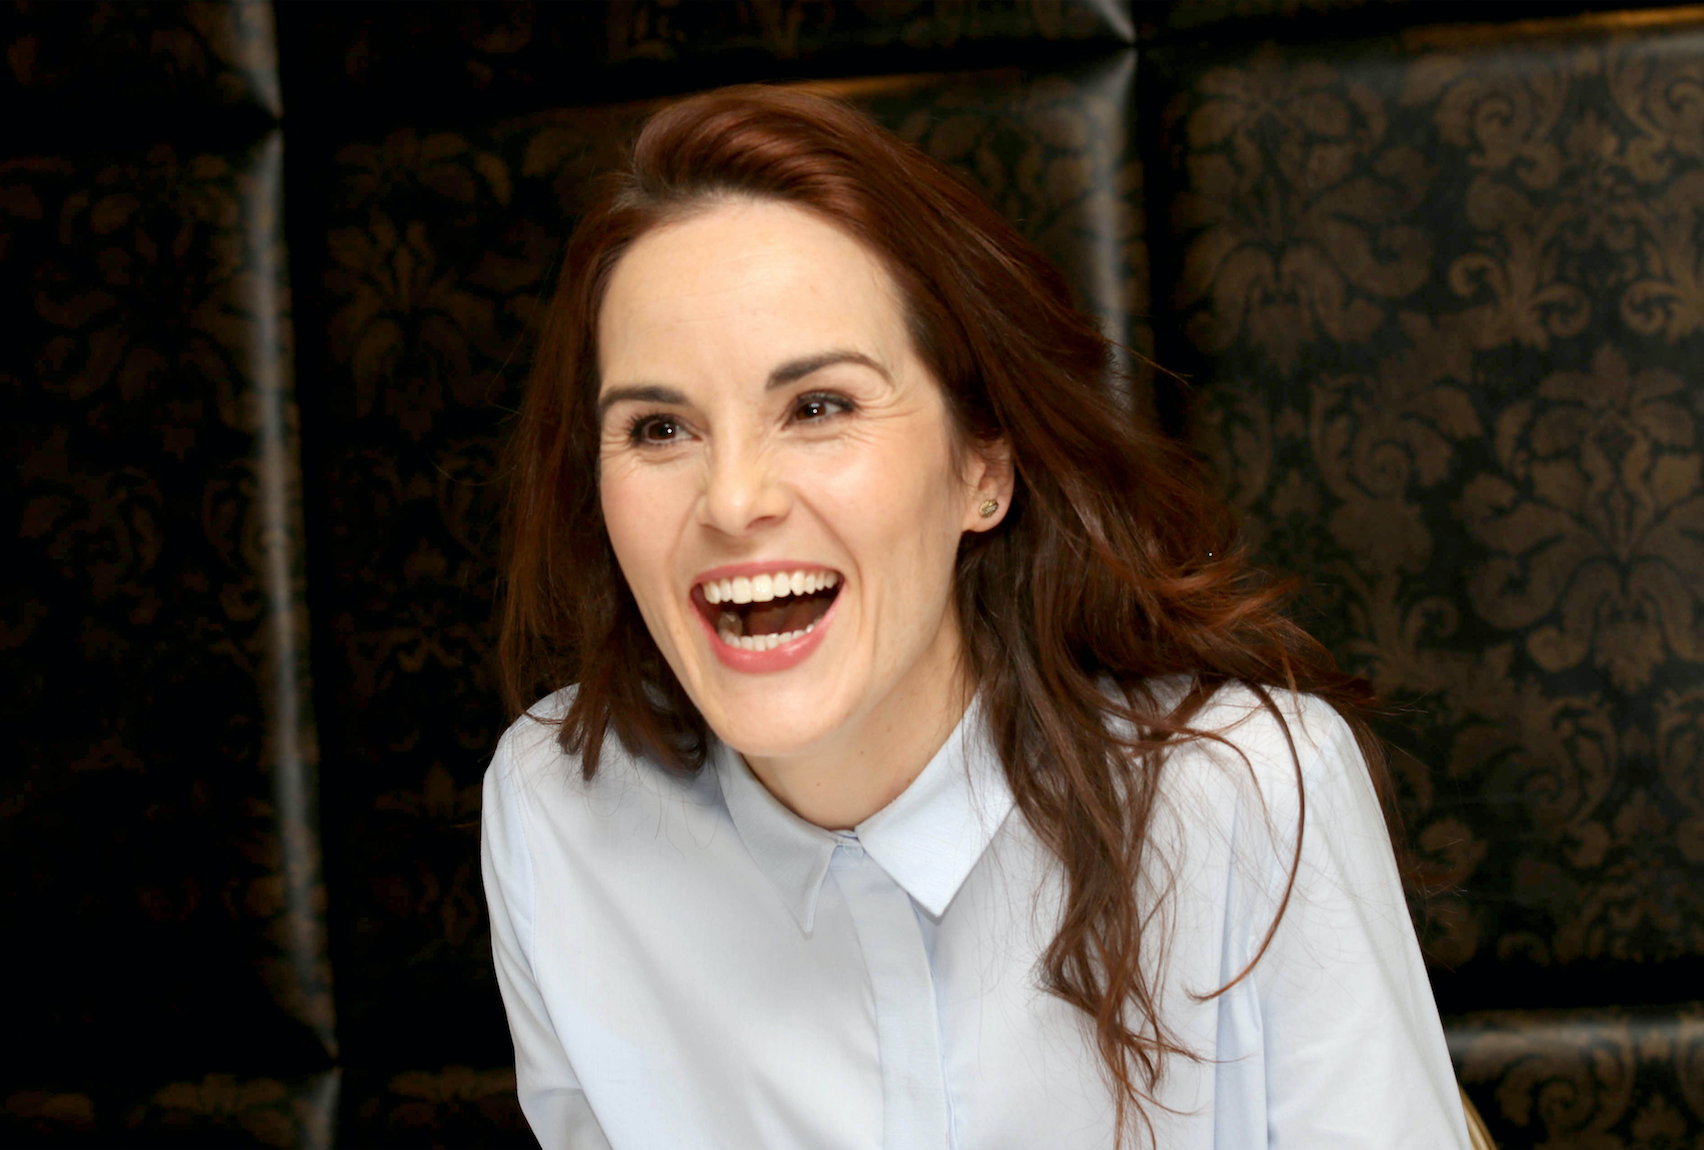 Michelle Dockery interview: 'I wouldn't say no to playing James